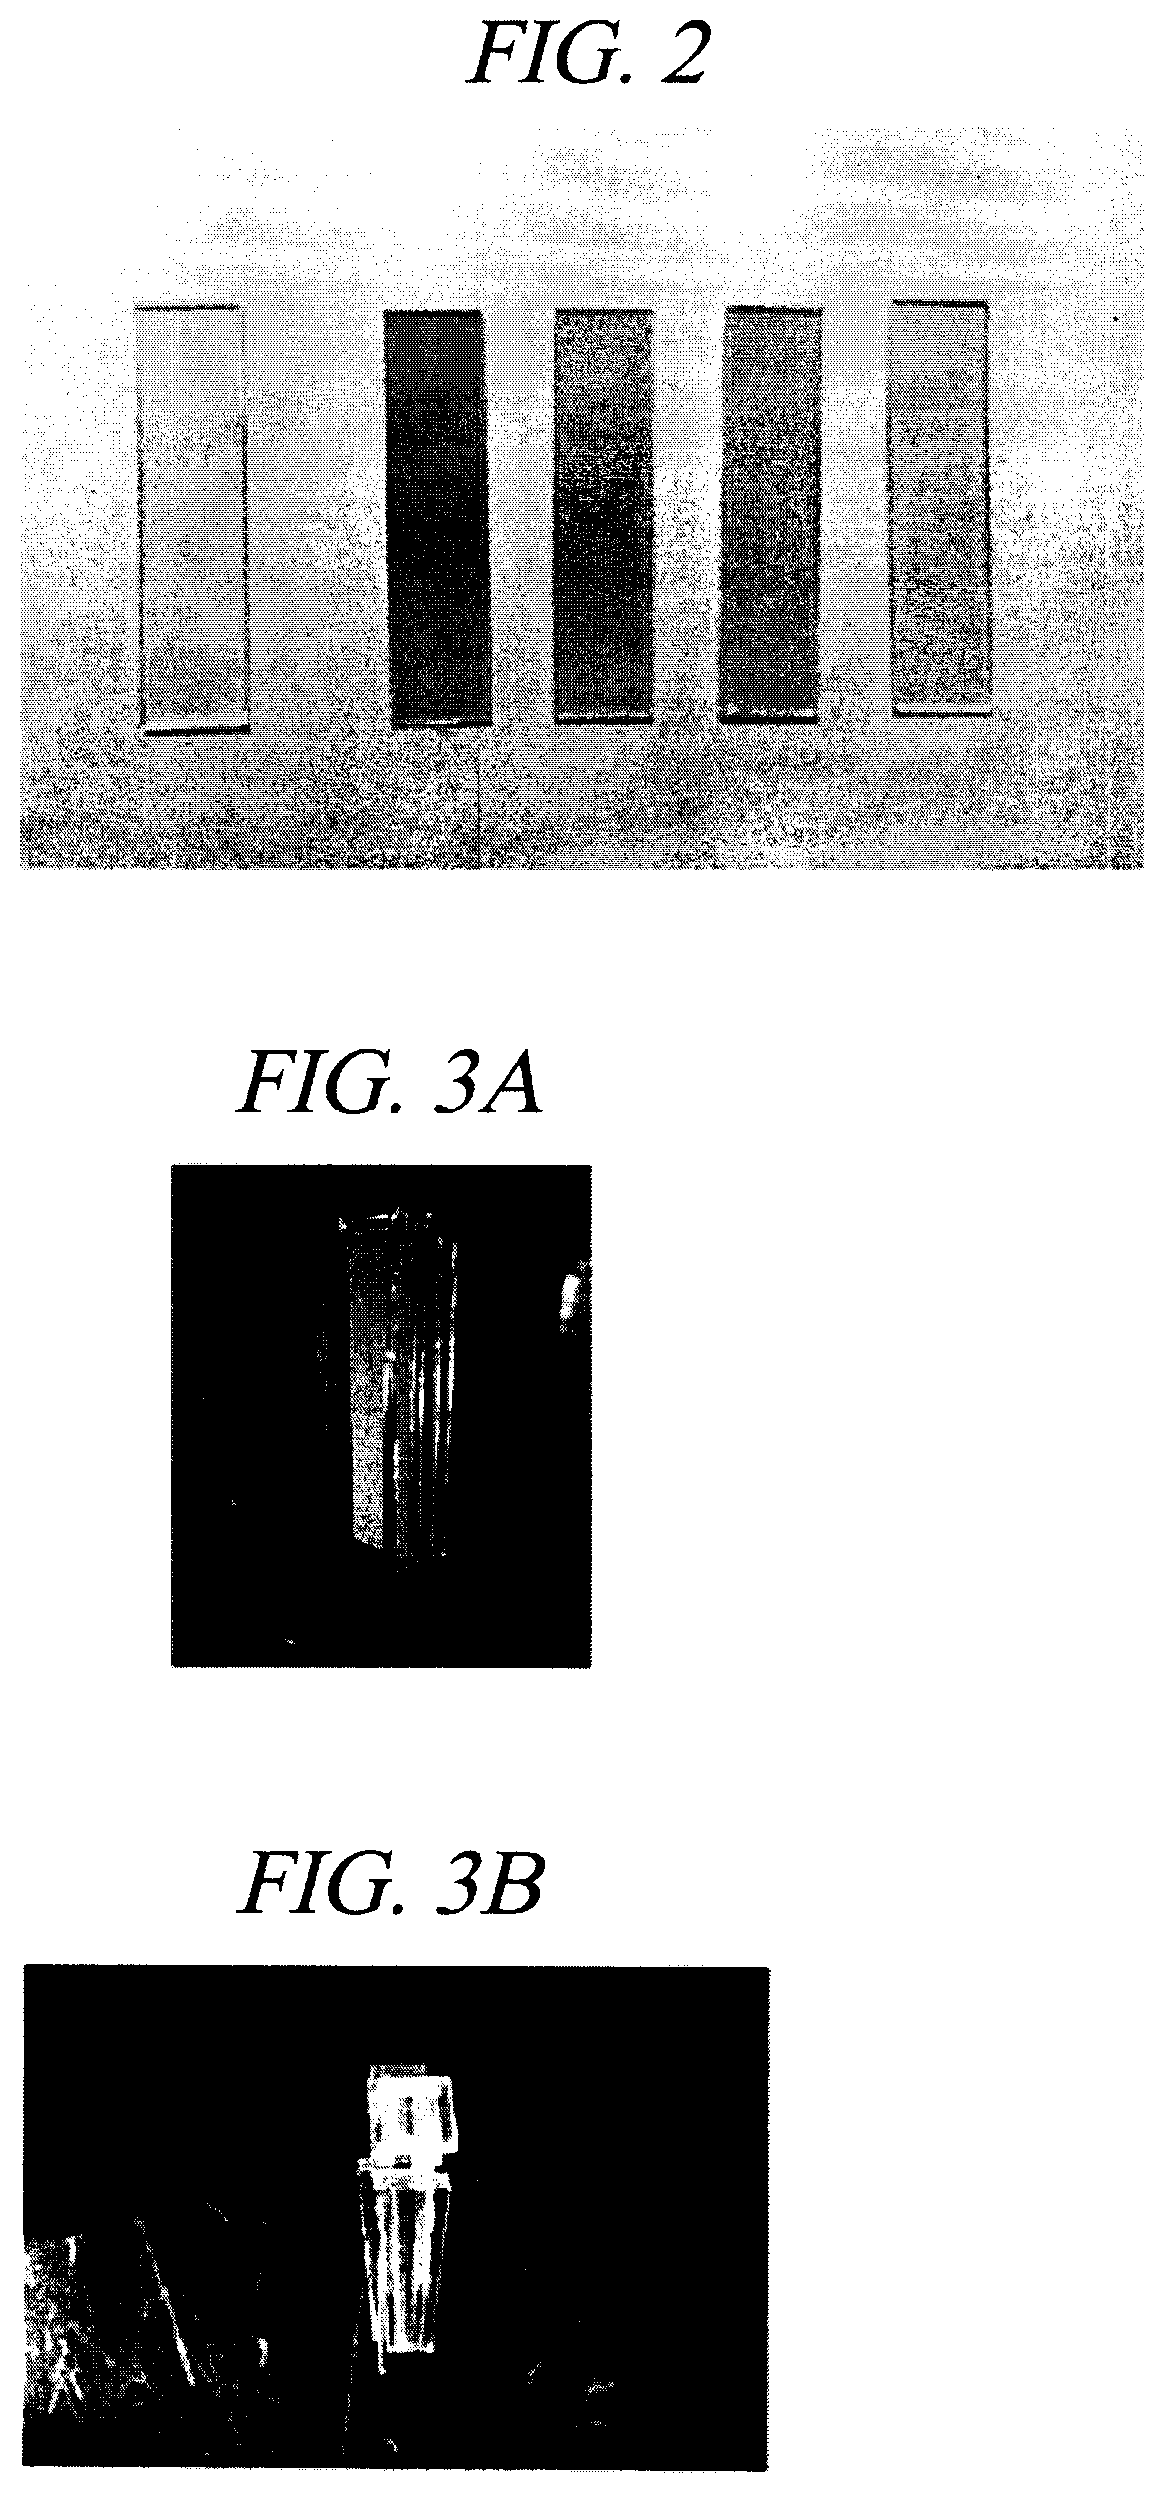 Dye-sensitized solar cell comprising light collecting device panel